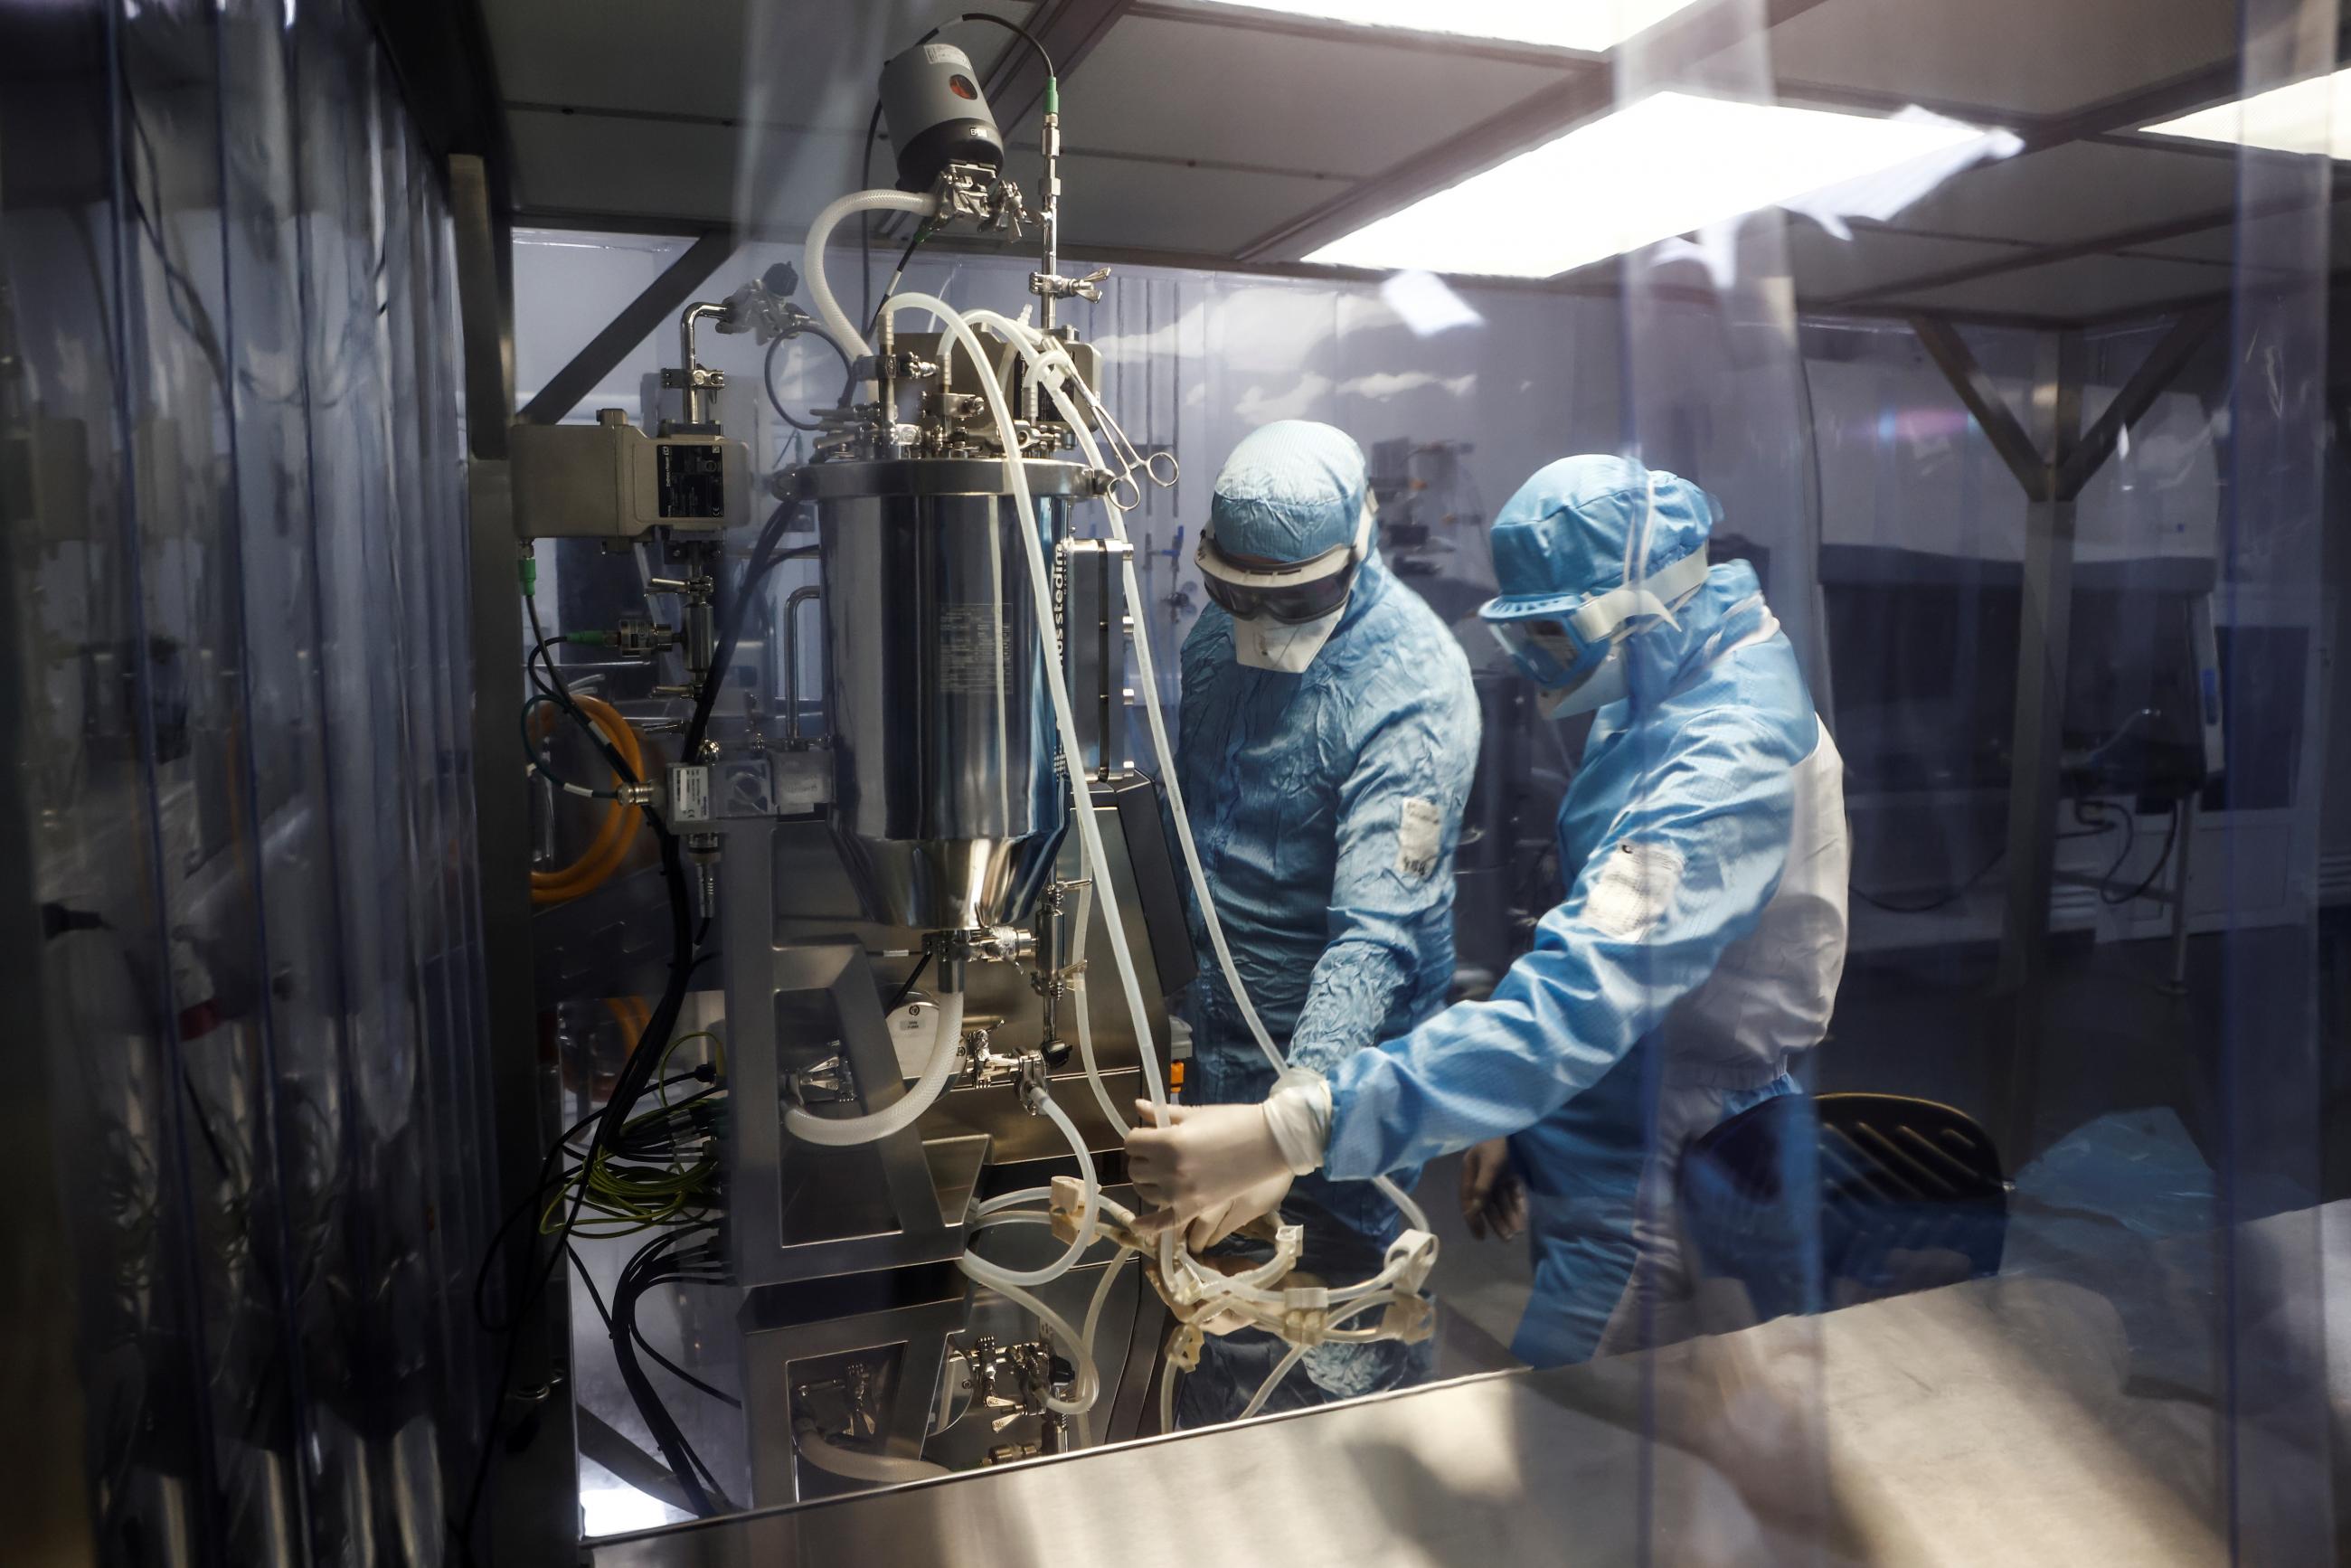 Specialists work with equipment at Chumakov Federal Scientific Center for Research and Development of Immune-and-Biological Products, which conducts development of Russia's third COVID vaccine.